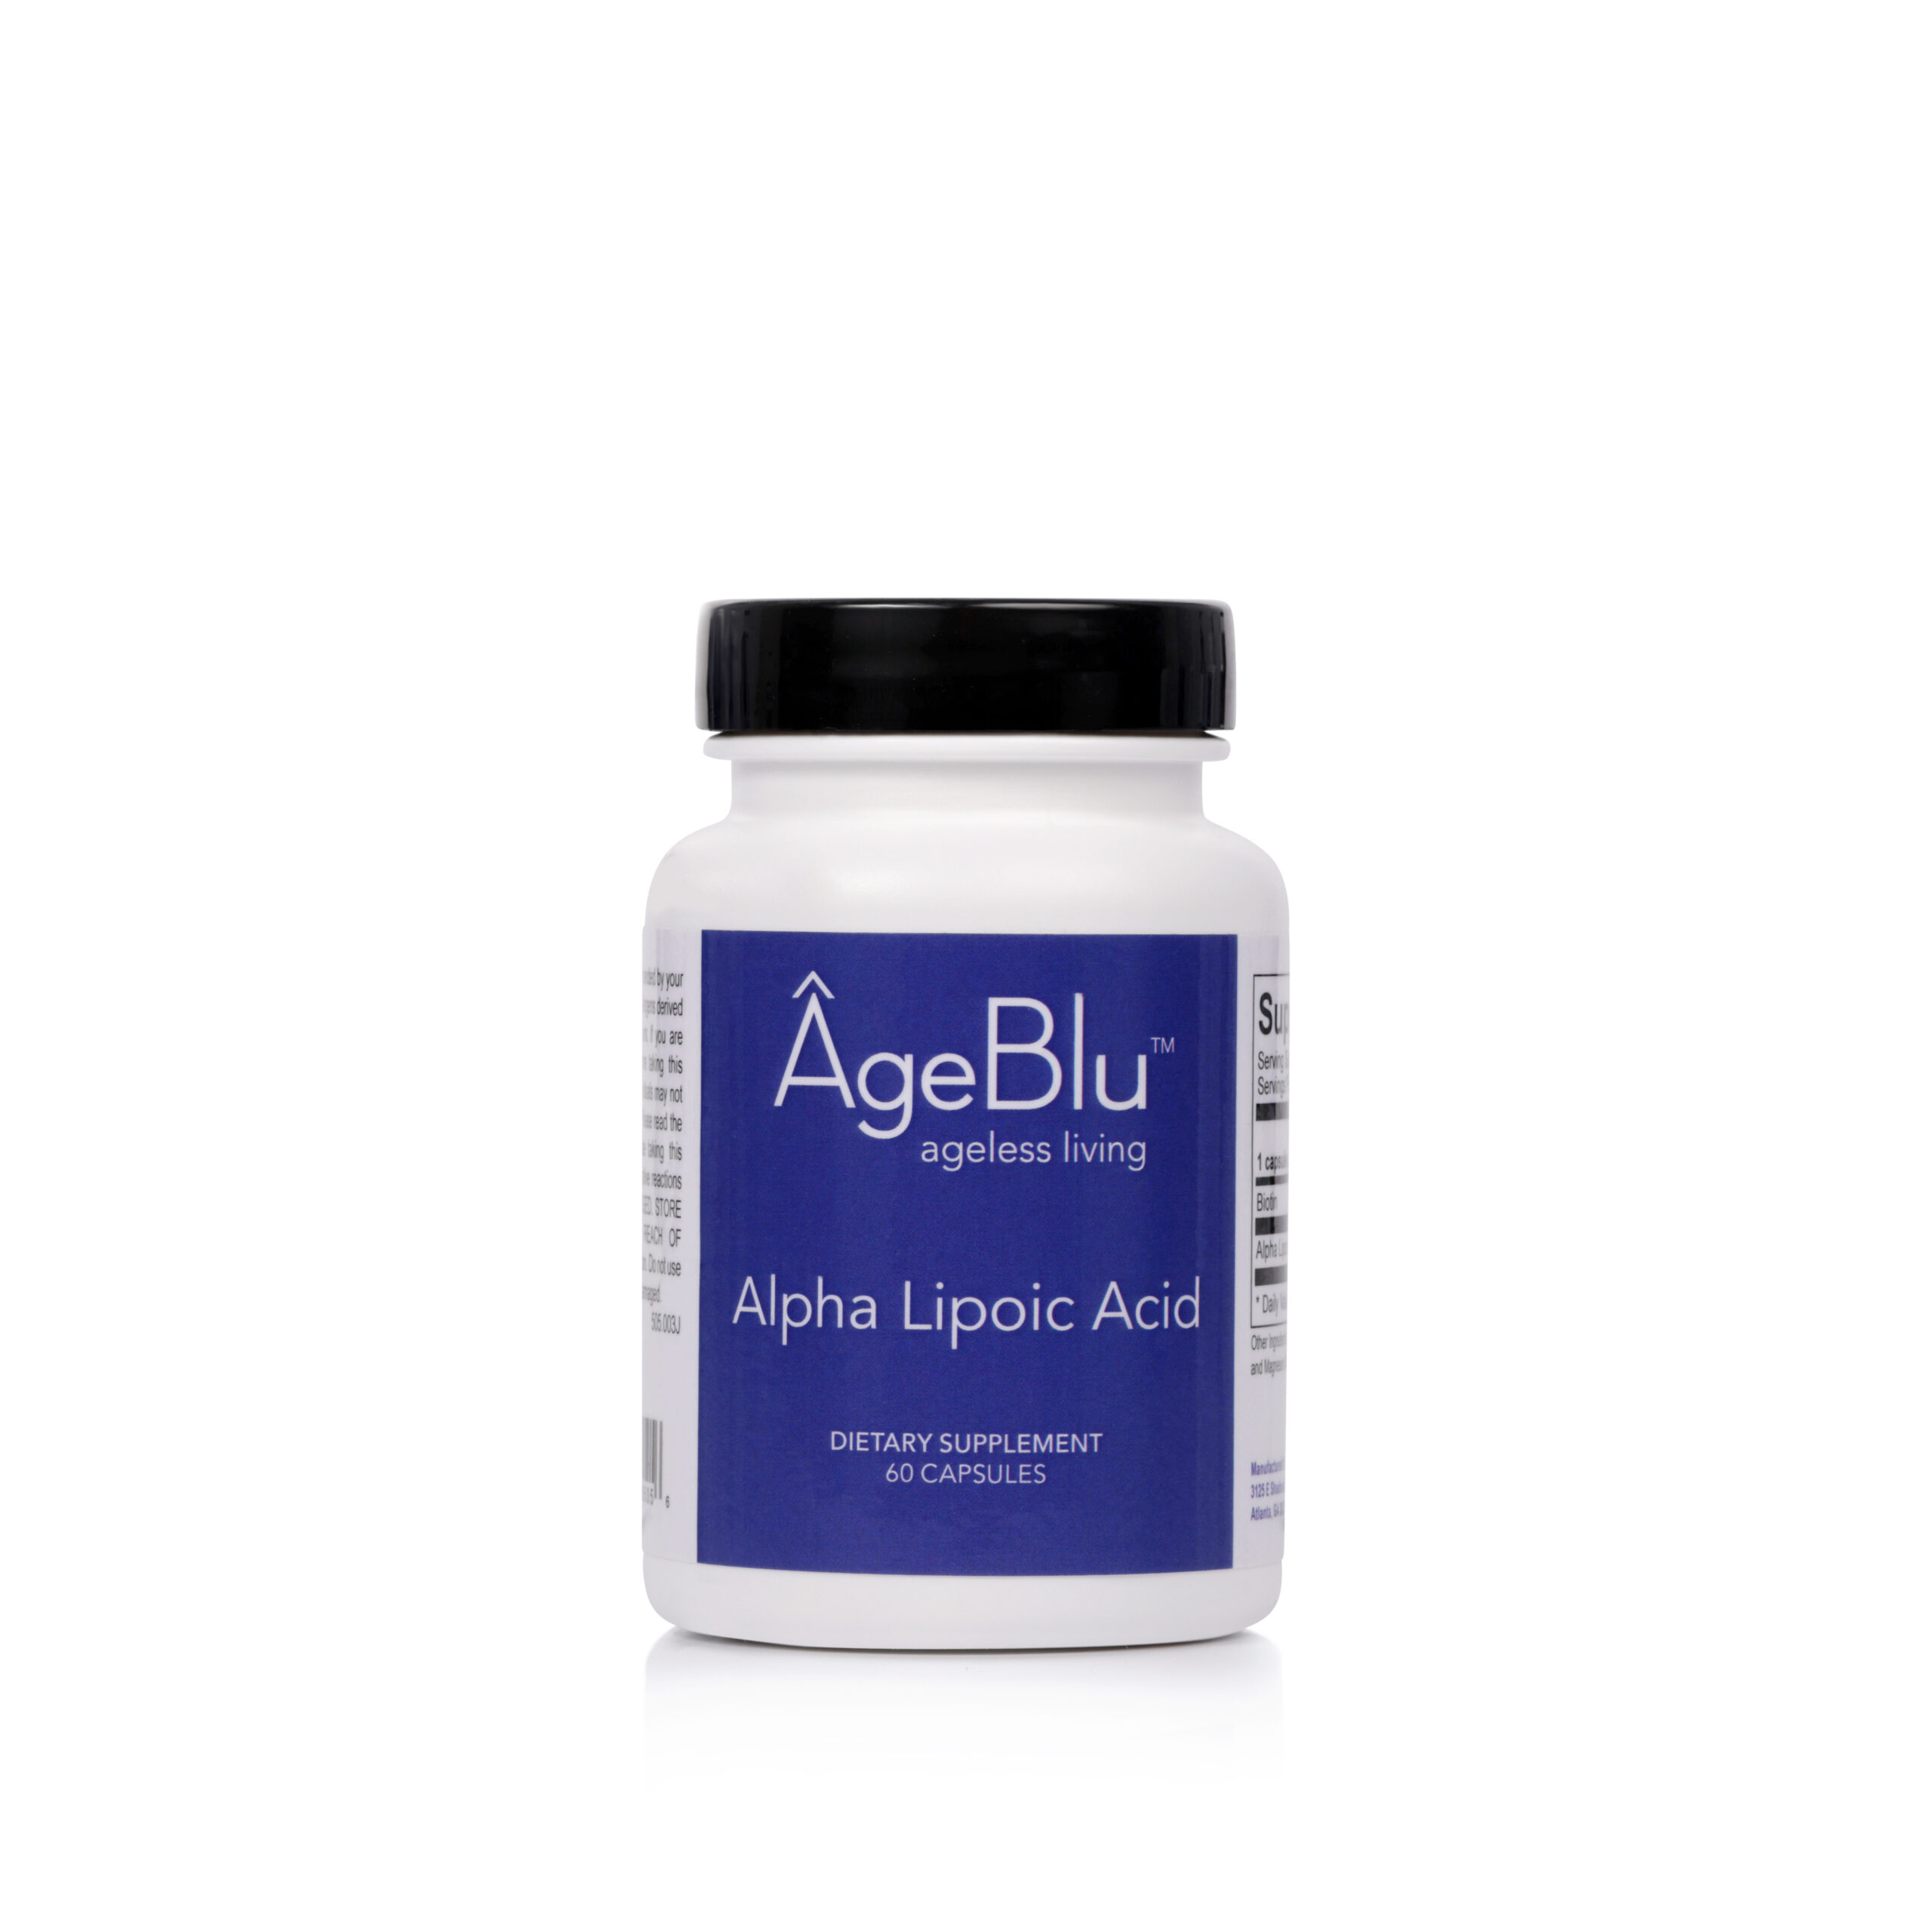 Alpha Lipoic Acid White Supplement bottle with 60 capsules affixed with a blue label and a black top